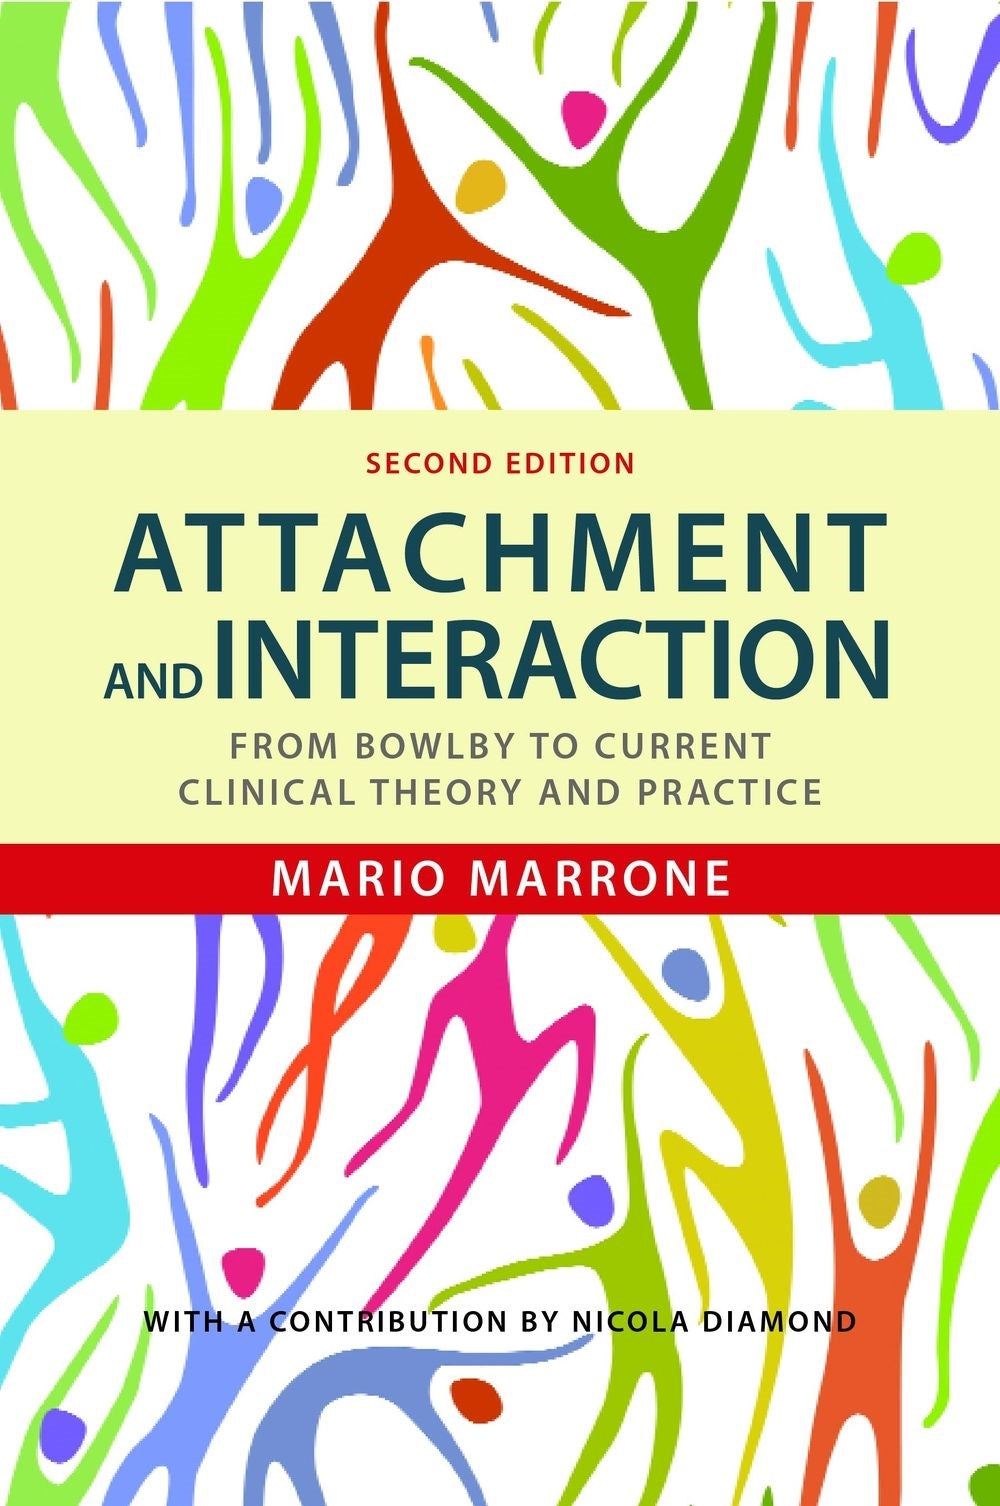 Attachment and Interaction by Mario Marrone